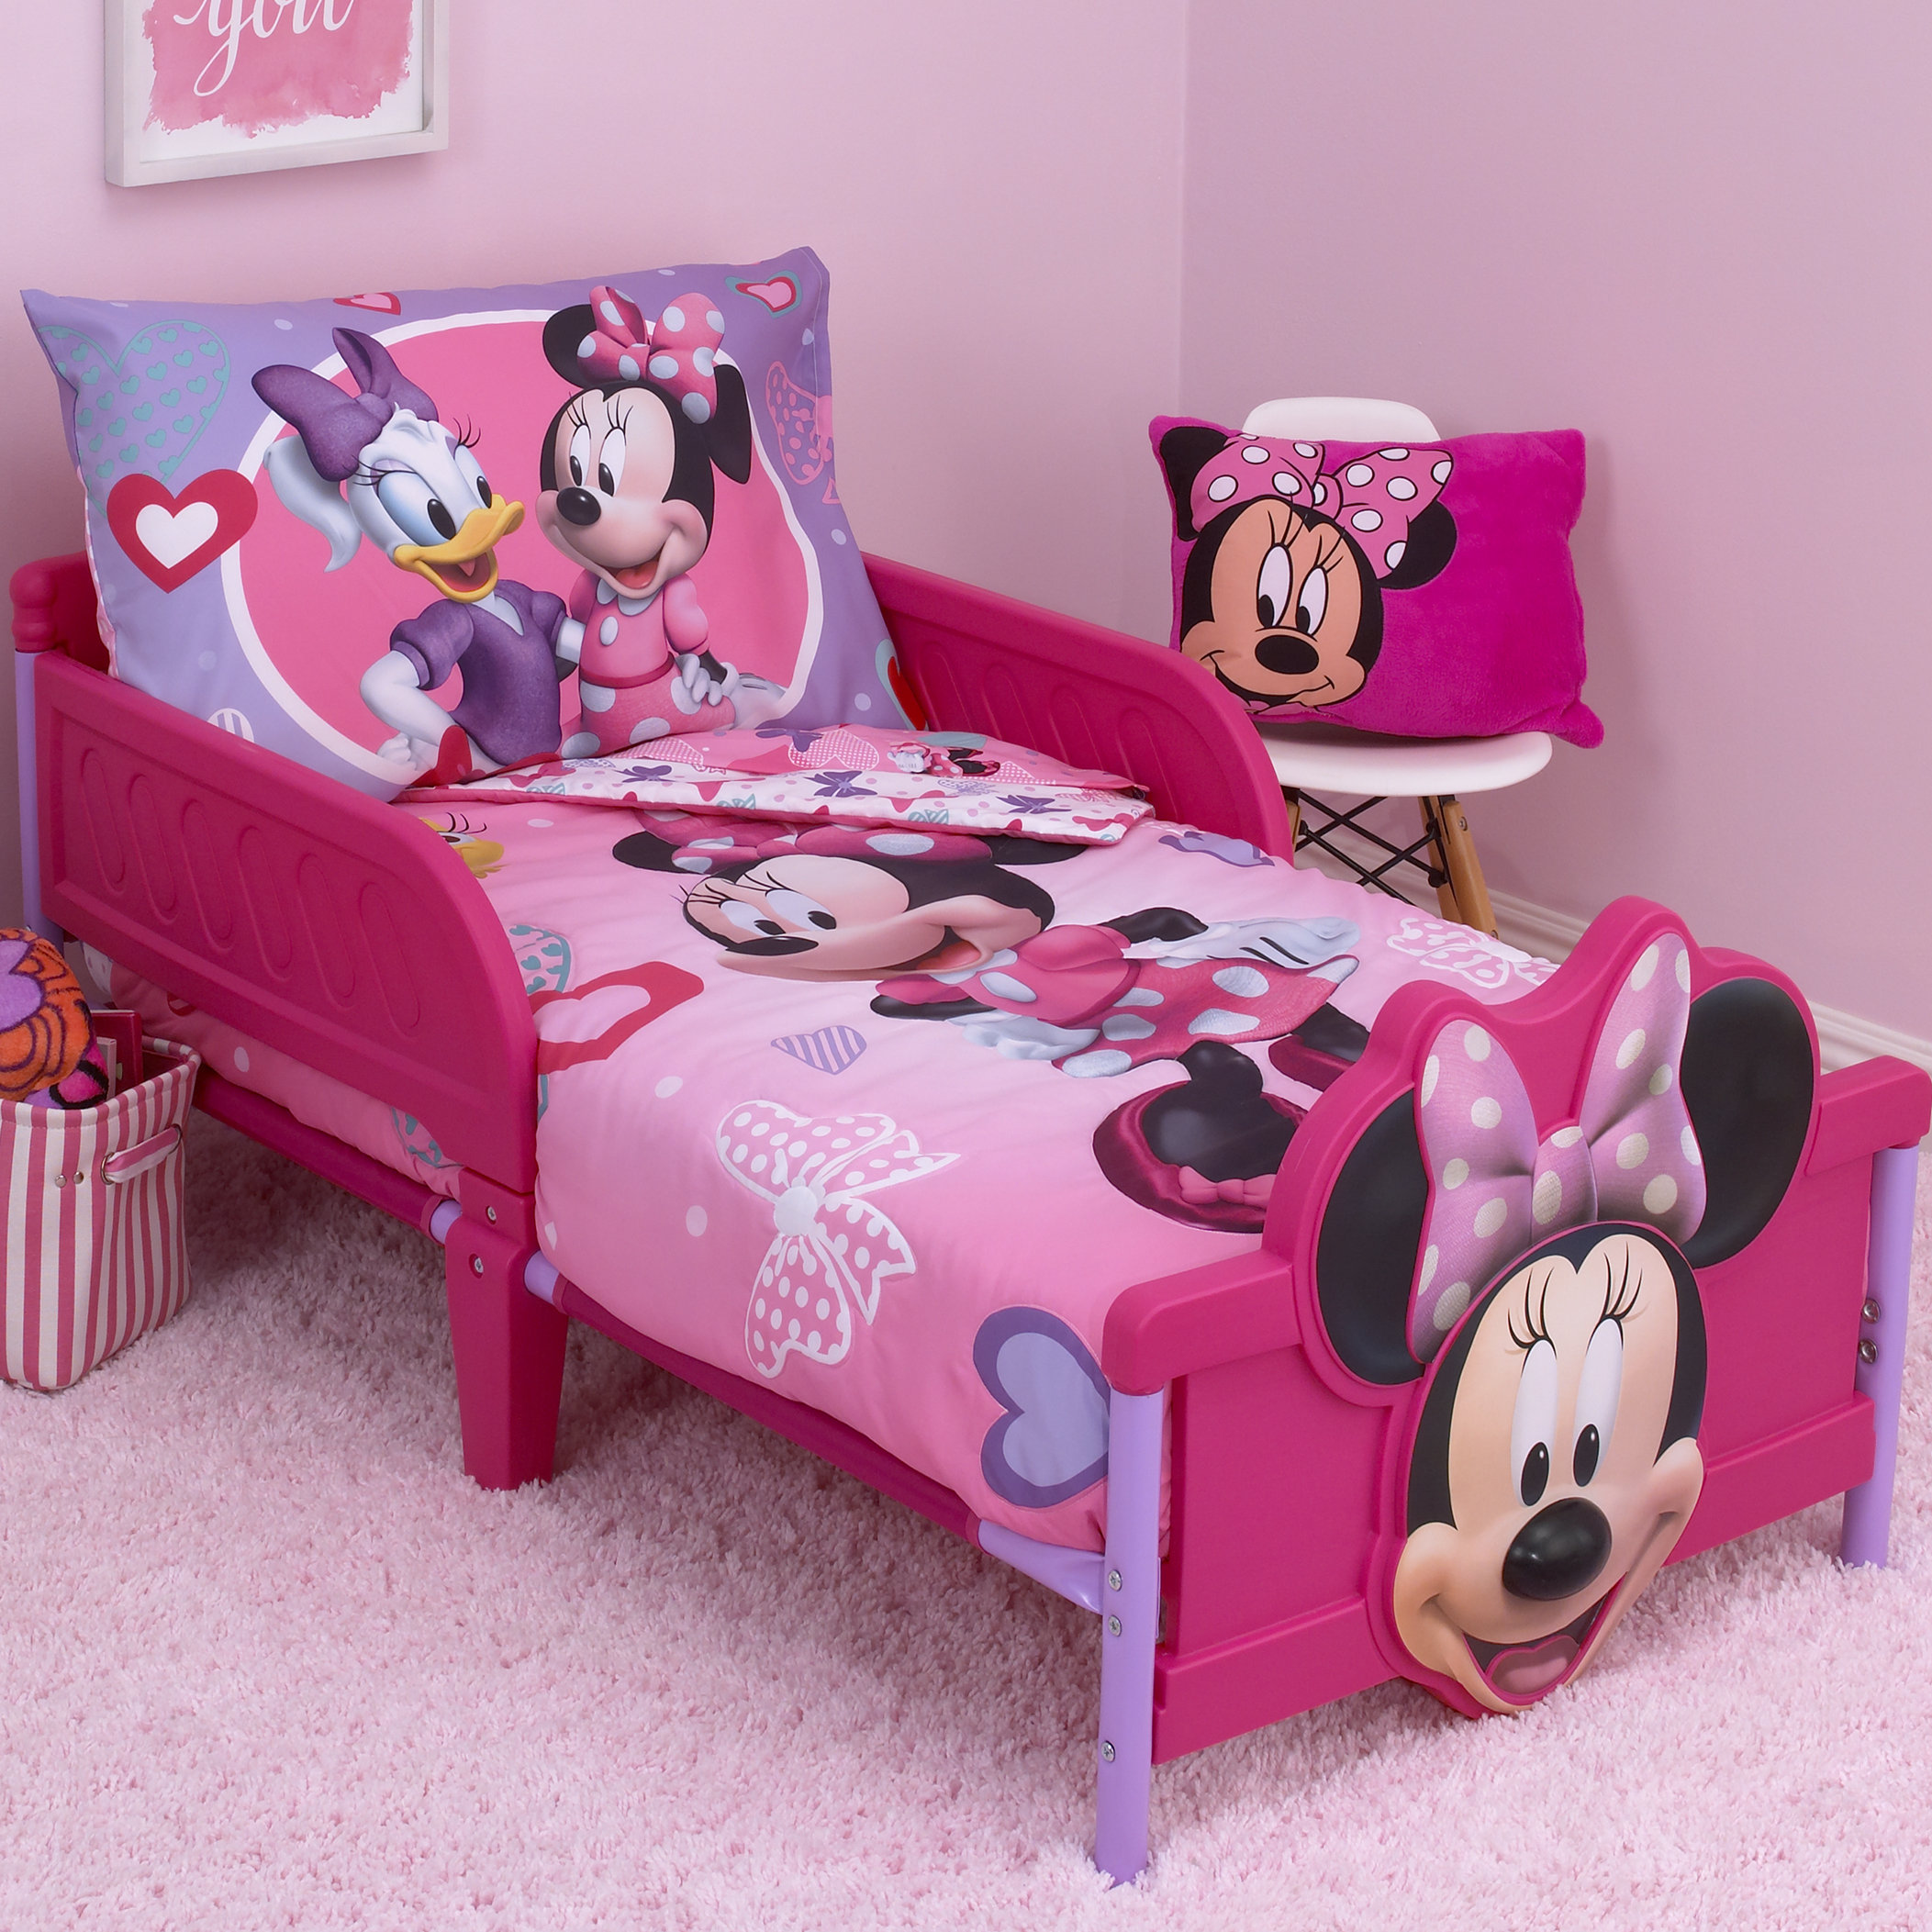 Disney Minnie Mouse Hearts And Bows 4 Piece Toddler Bedding Set